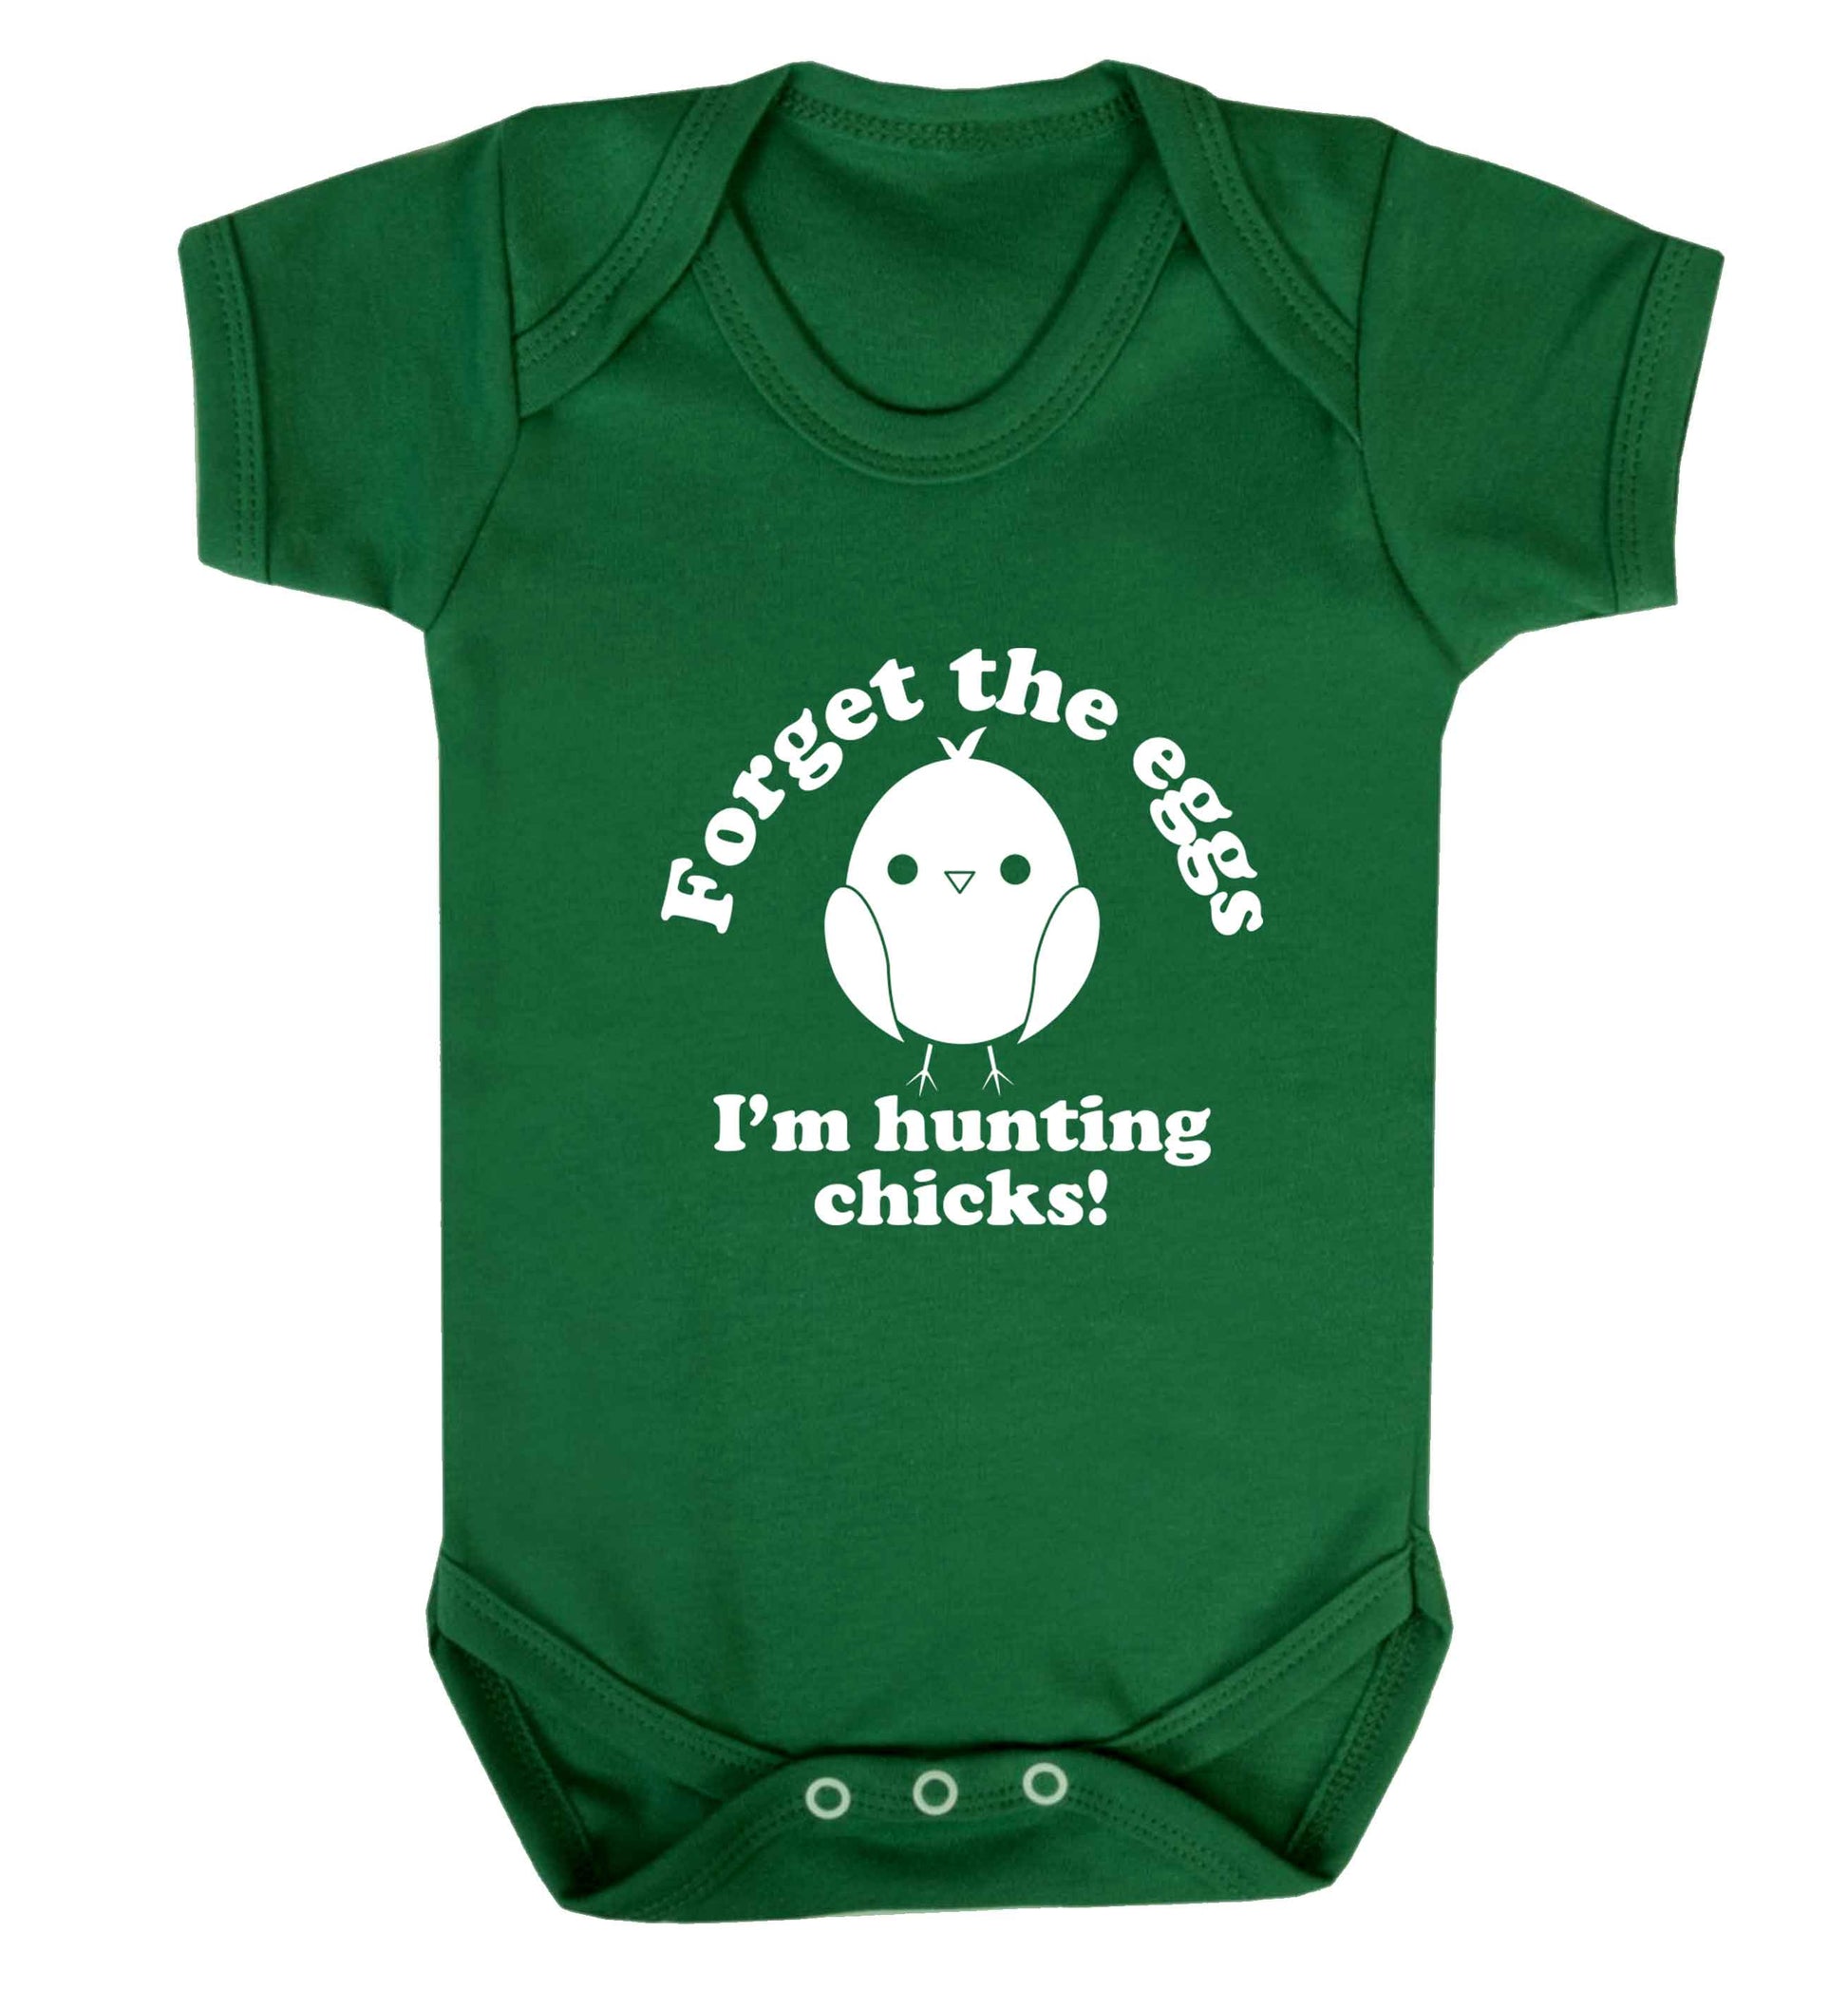 Forget the eggs I'm hunting chicks! baby vest green 18-24 months